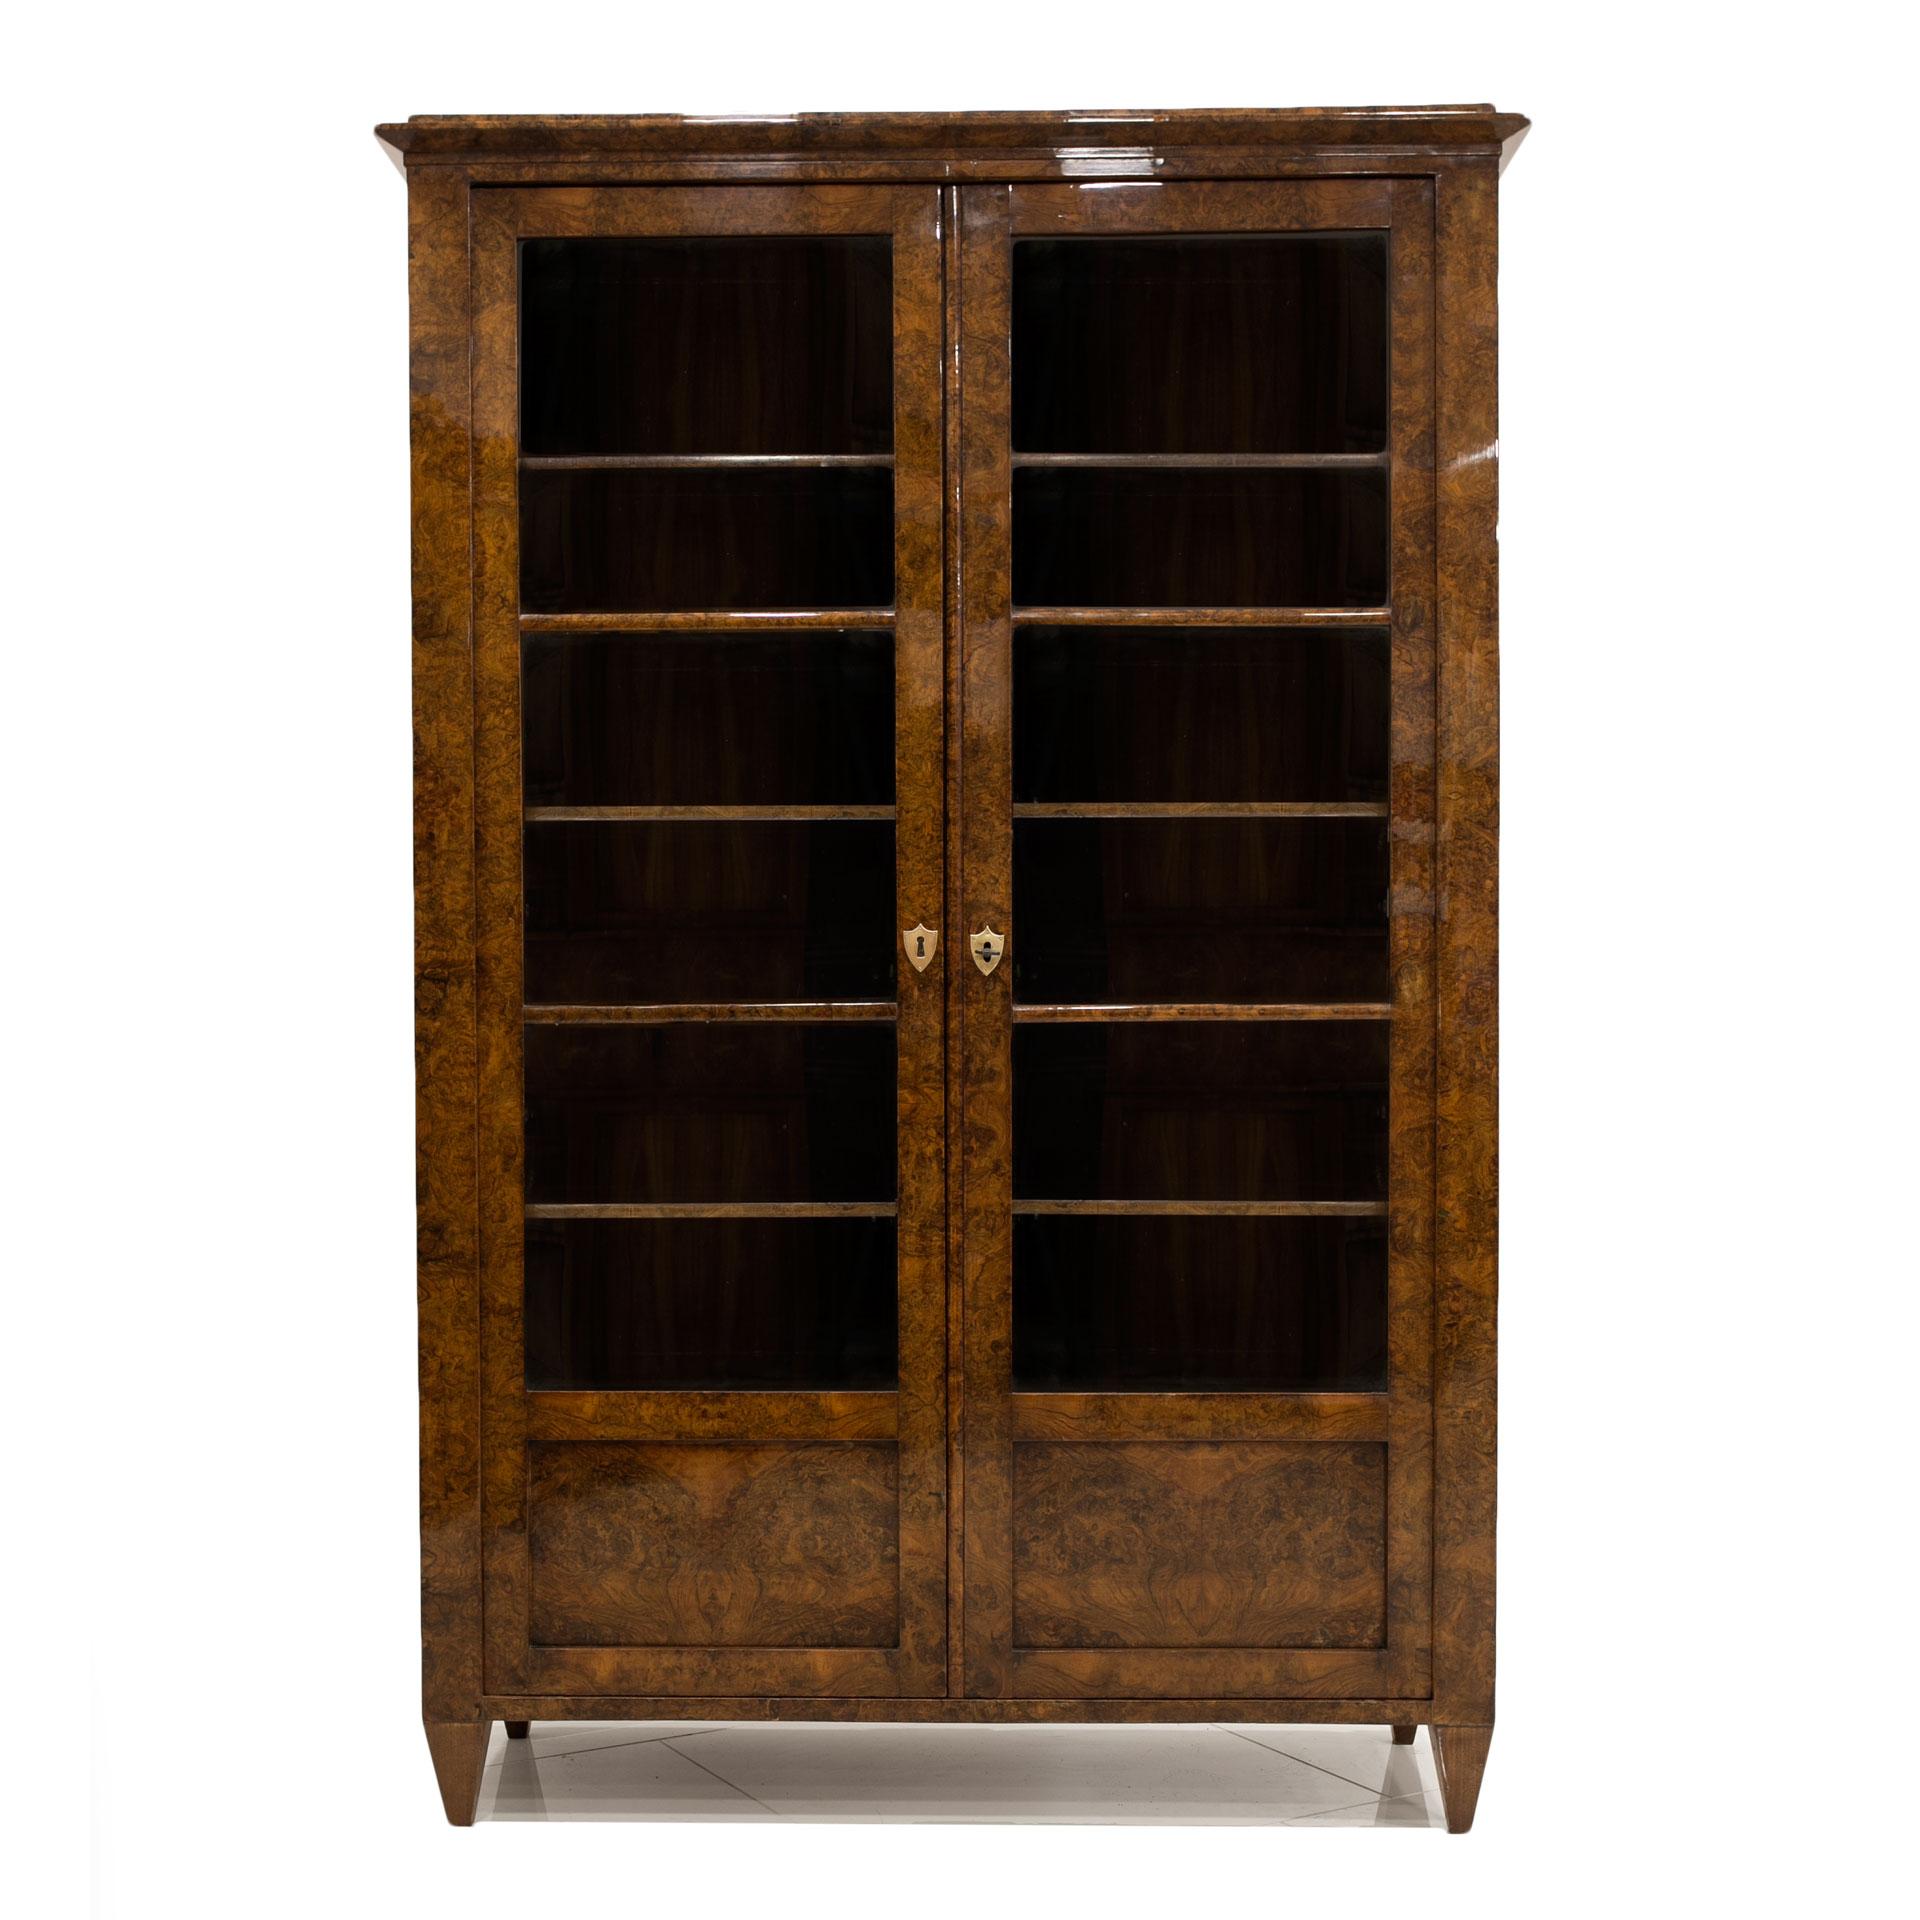 This Biedermeier vitrine comes from Germany and was made, circa 1830-1850. It is made of coniferous wood, veneered with burled walnut with a very decorative drawing. It has undergone a professional renovation process. The surface is finished with